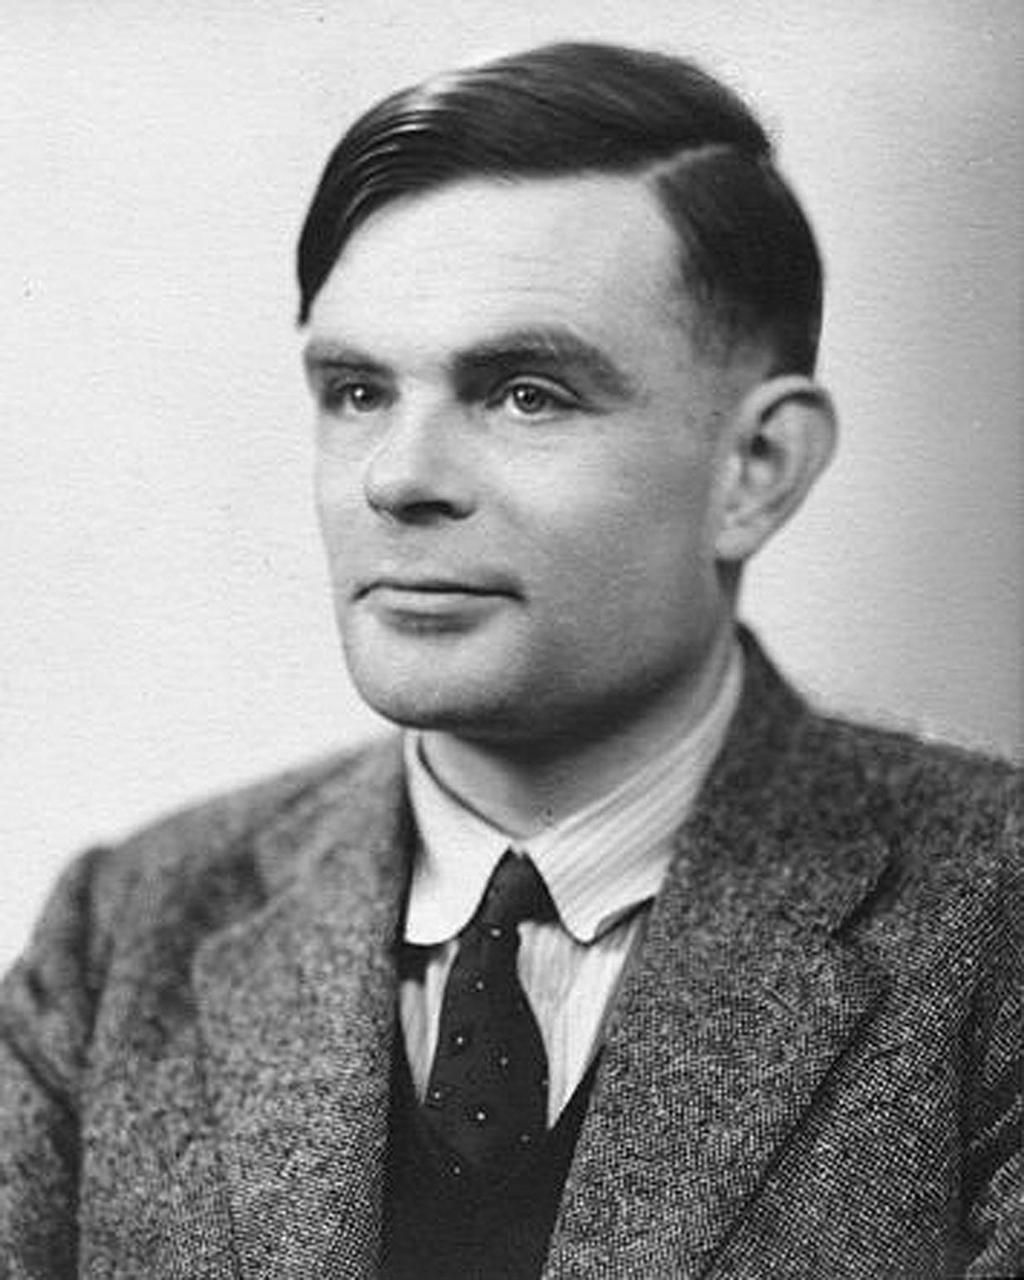 Alan Turing Alan Turing (1912-1954) was a British mathematician, cryptoanalyst, and computer scientist.